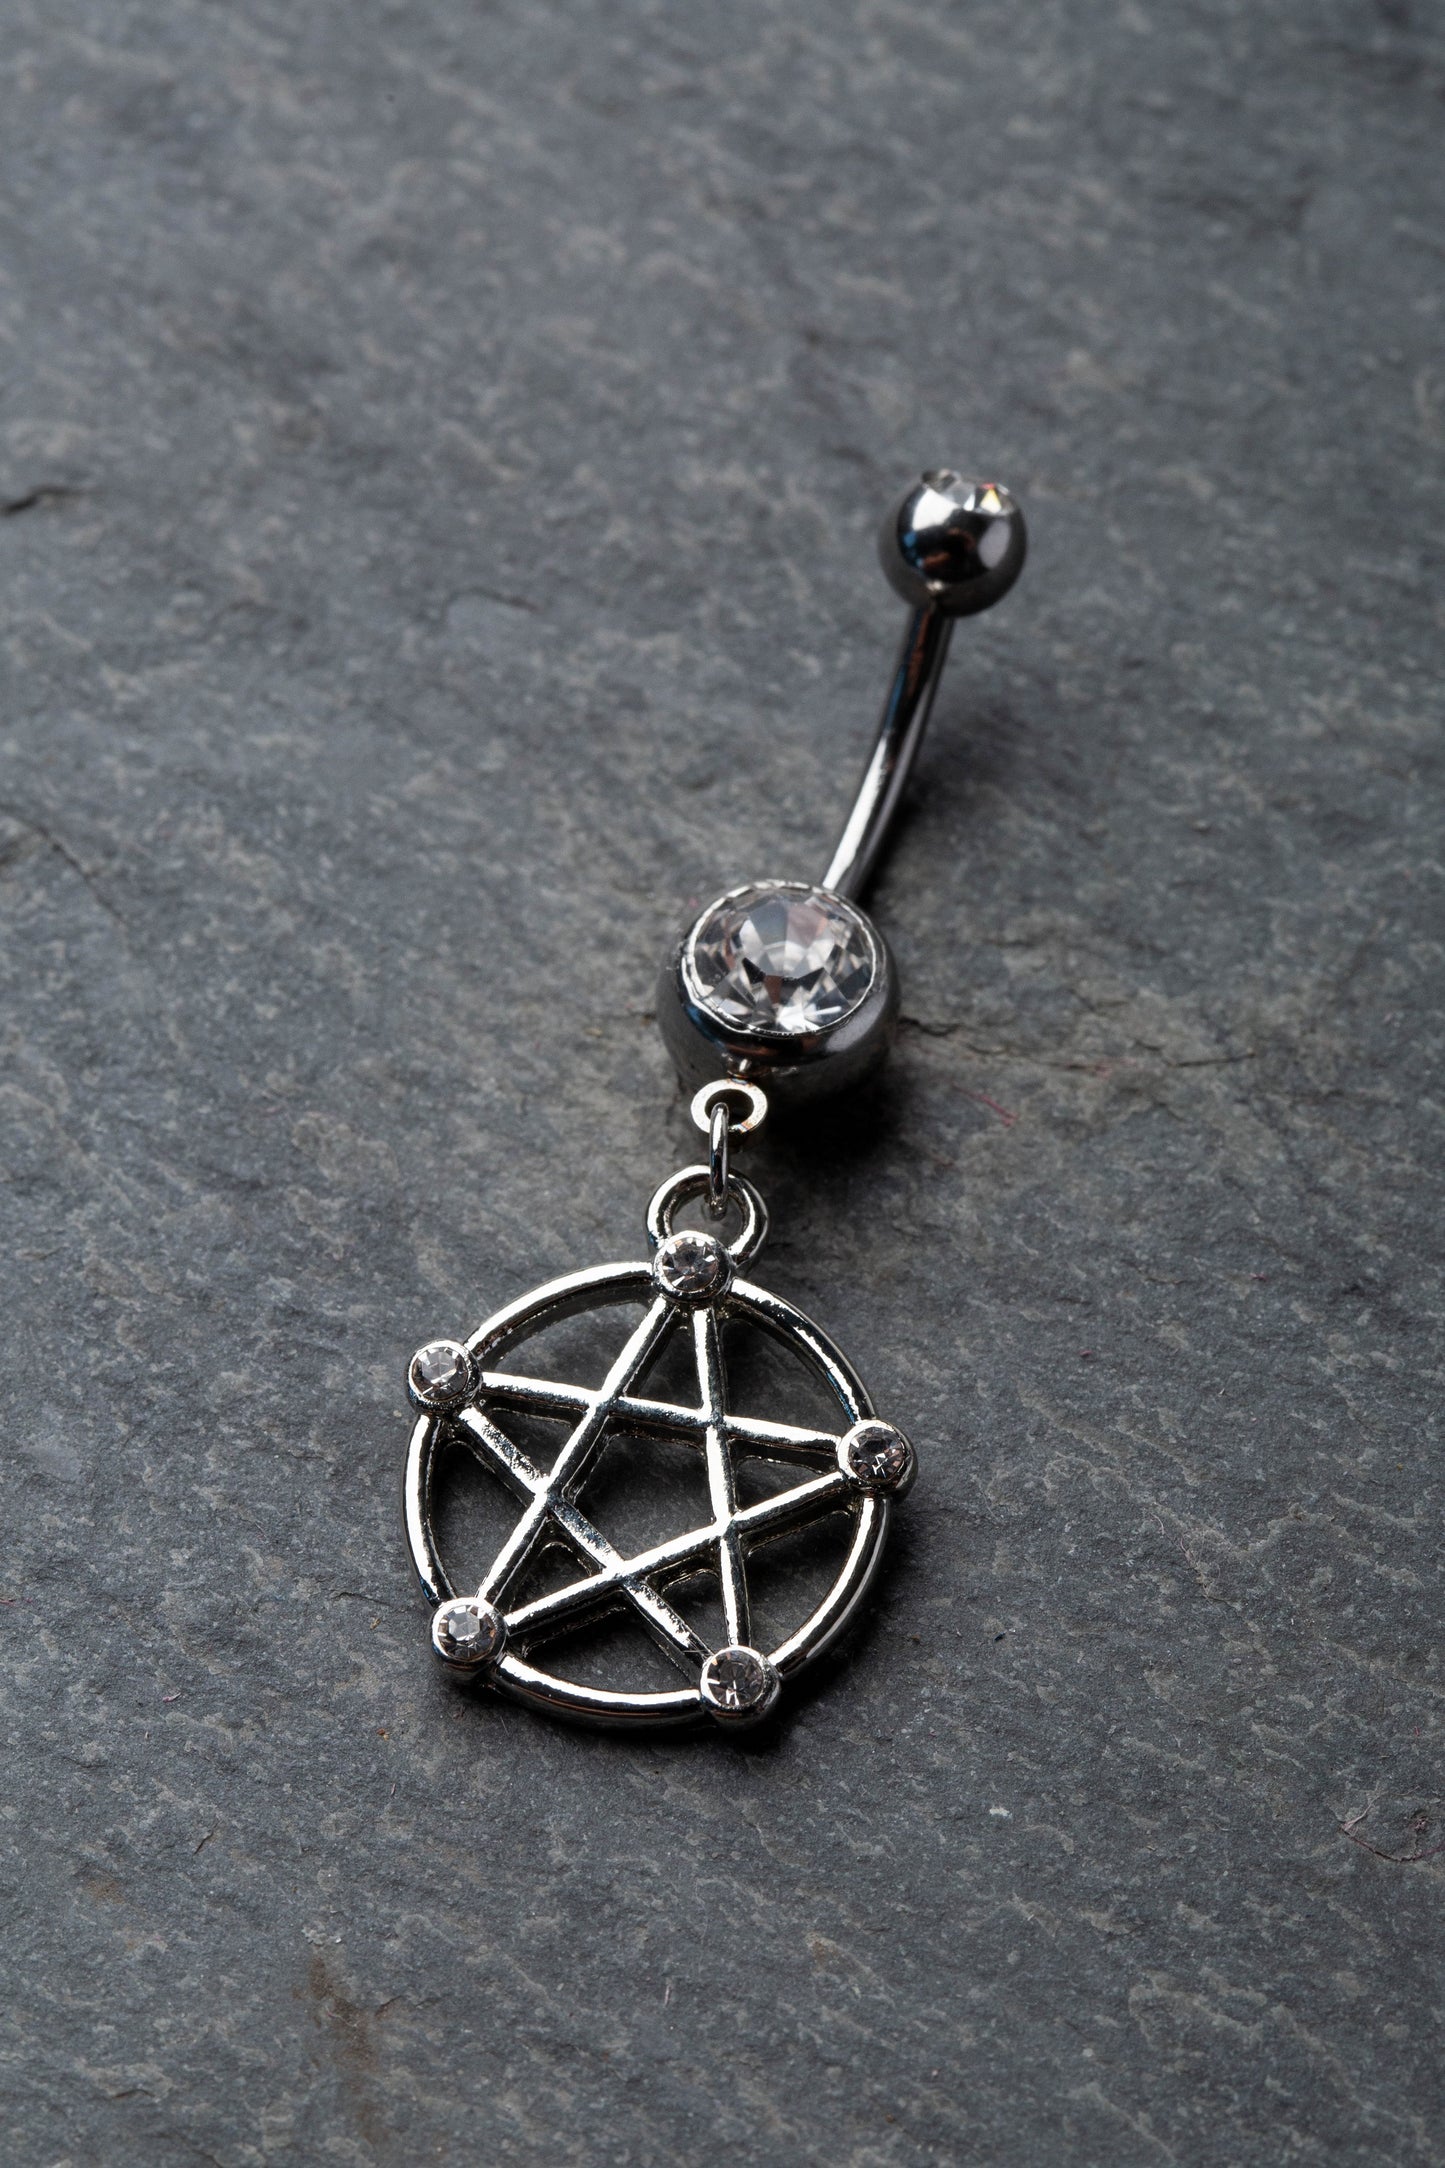 Pentacle Dangle Double Jeweled Belly Button Ring - 316L Stainless Steel